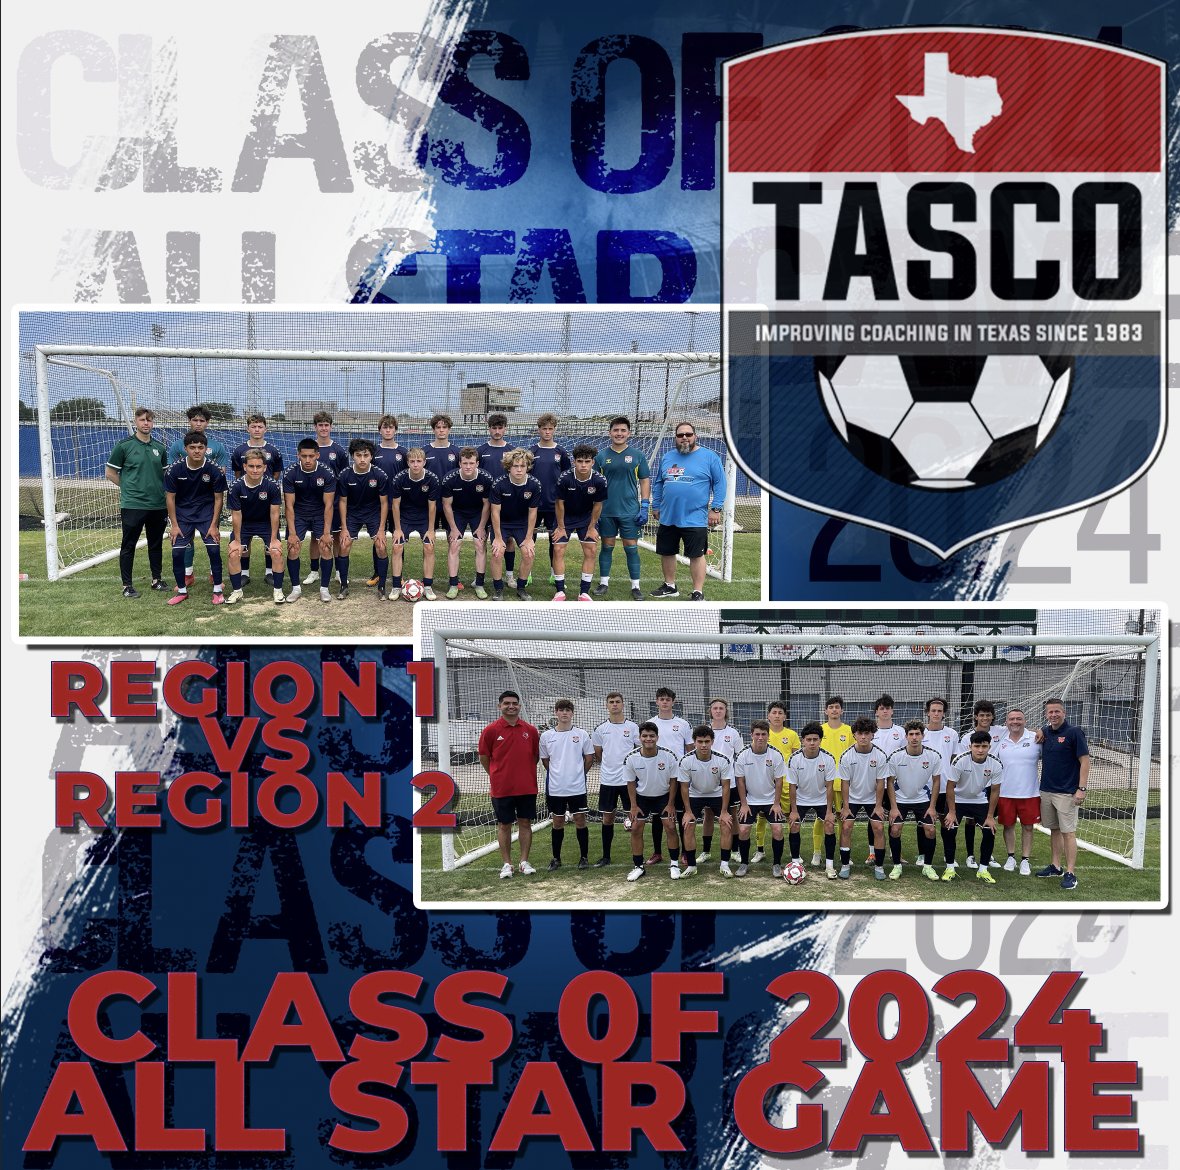 It turned out to be a great day yesterday for our games! Thanks to our Region 1 and Region 2 All-Star Boys for playing! #TASCO #TASCOALLSTAR #TXHSSoc #TXHSSoccer